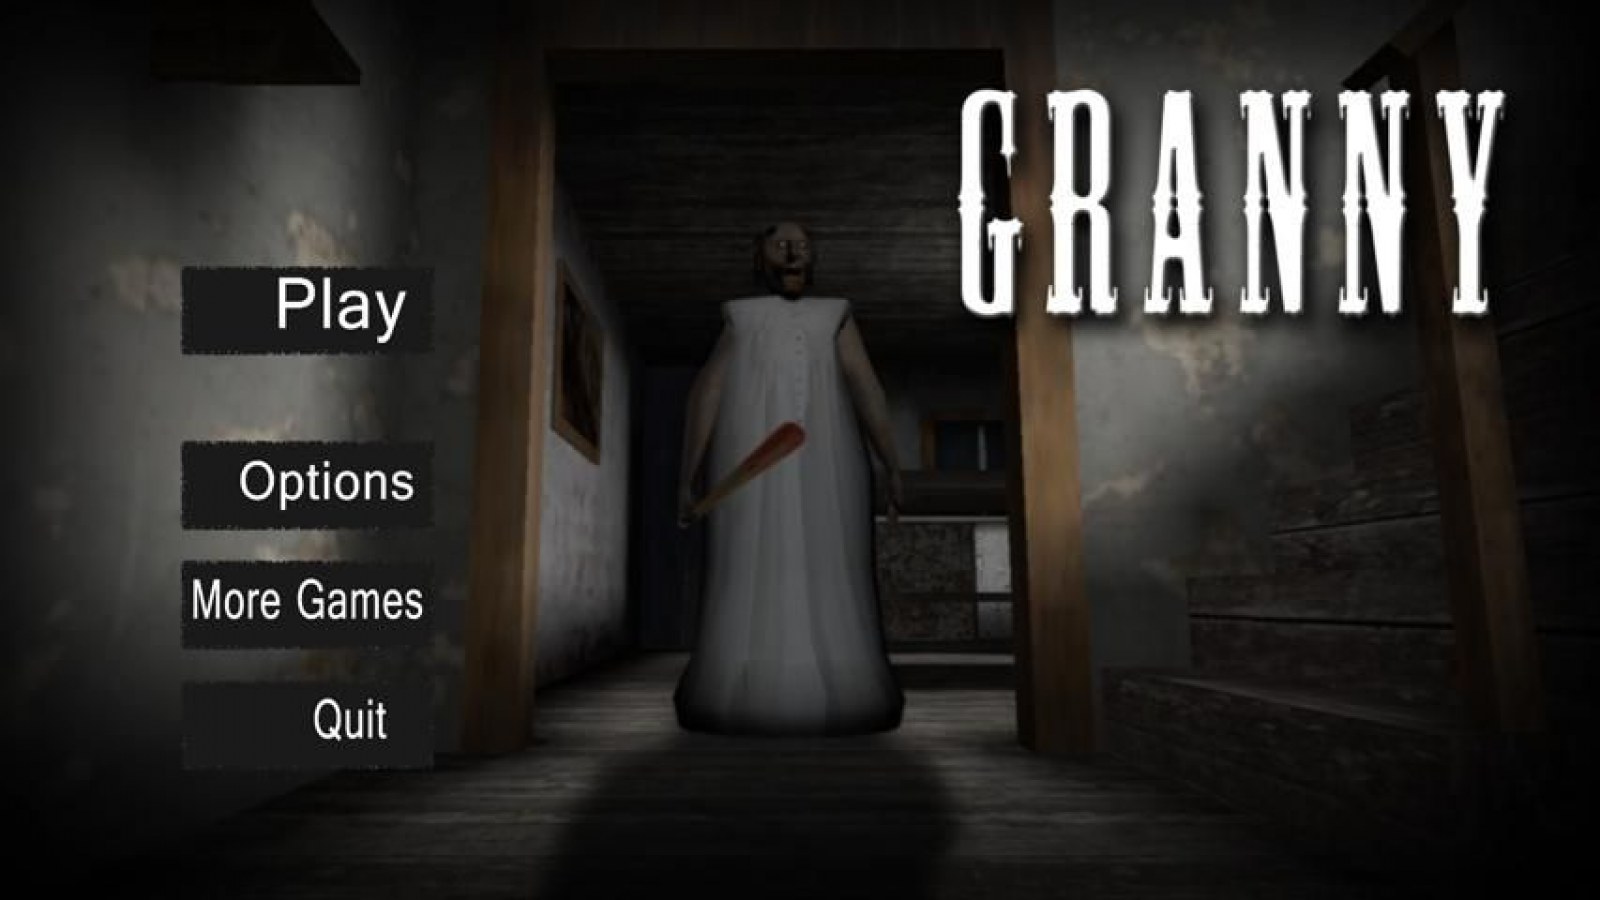 How To Beat Granny Horror Game Tips Steps Strategy For Getting Out Of The House Alive - granny granny granny granny granny granny granny roblox